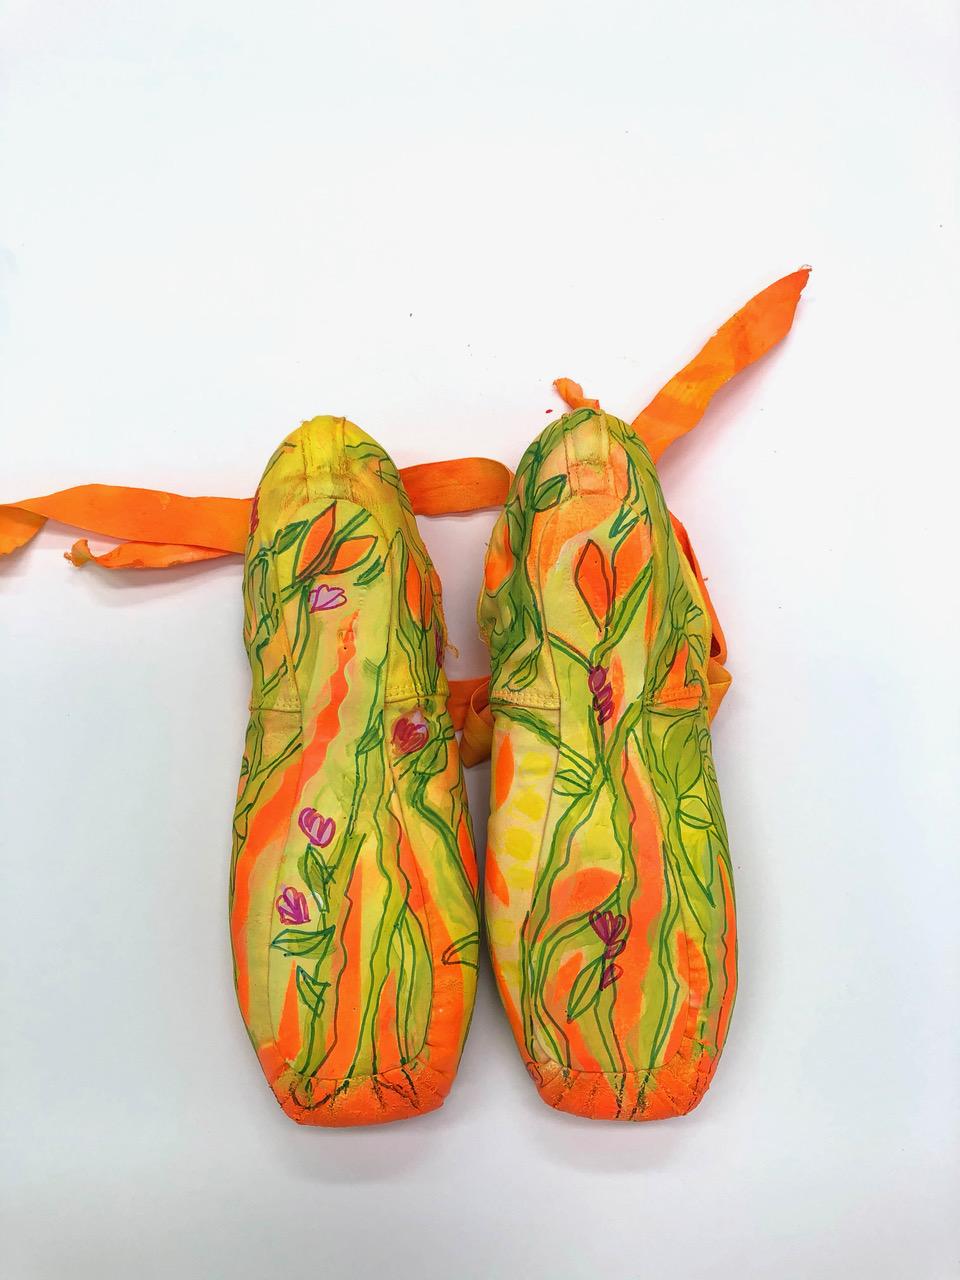 The Rite of Spring, orange and green flashe on ballet shoes, mixed media  - Sculpture by Rachelle Krieger